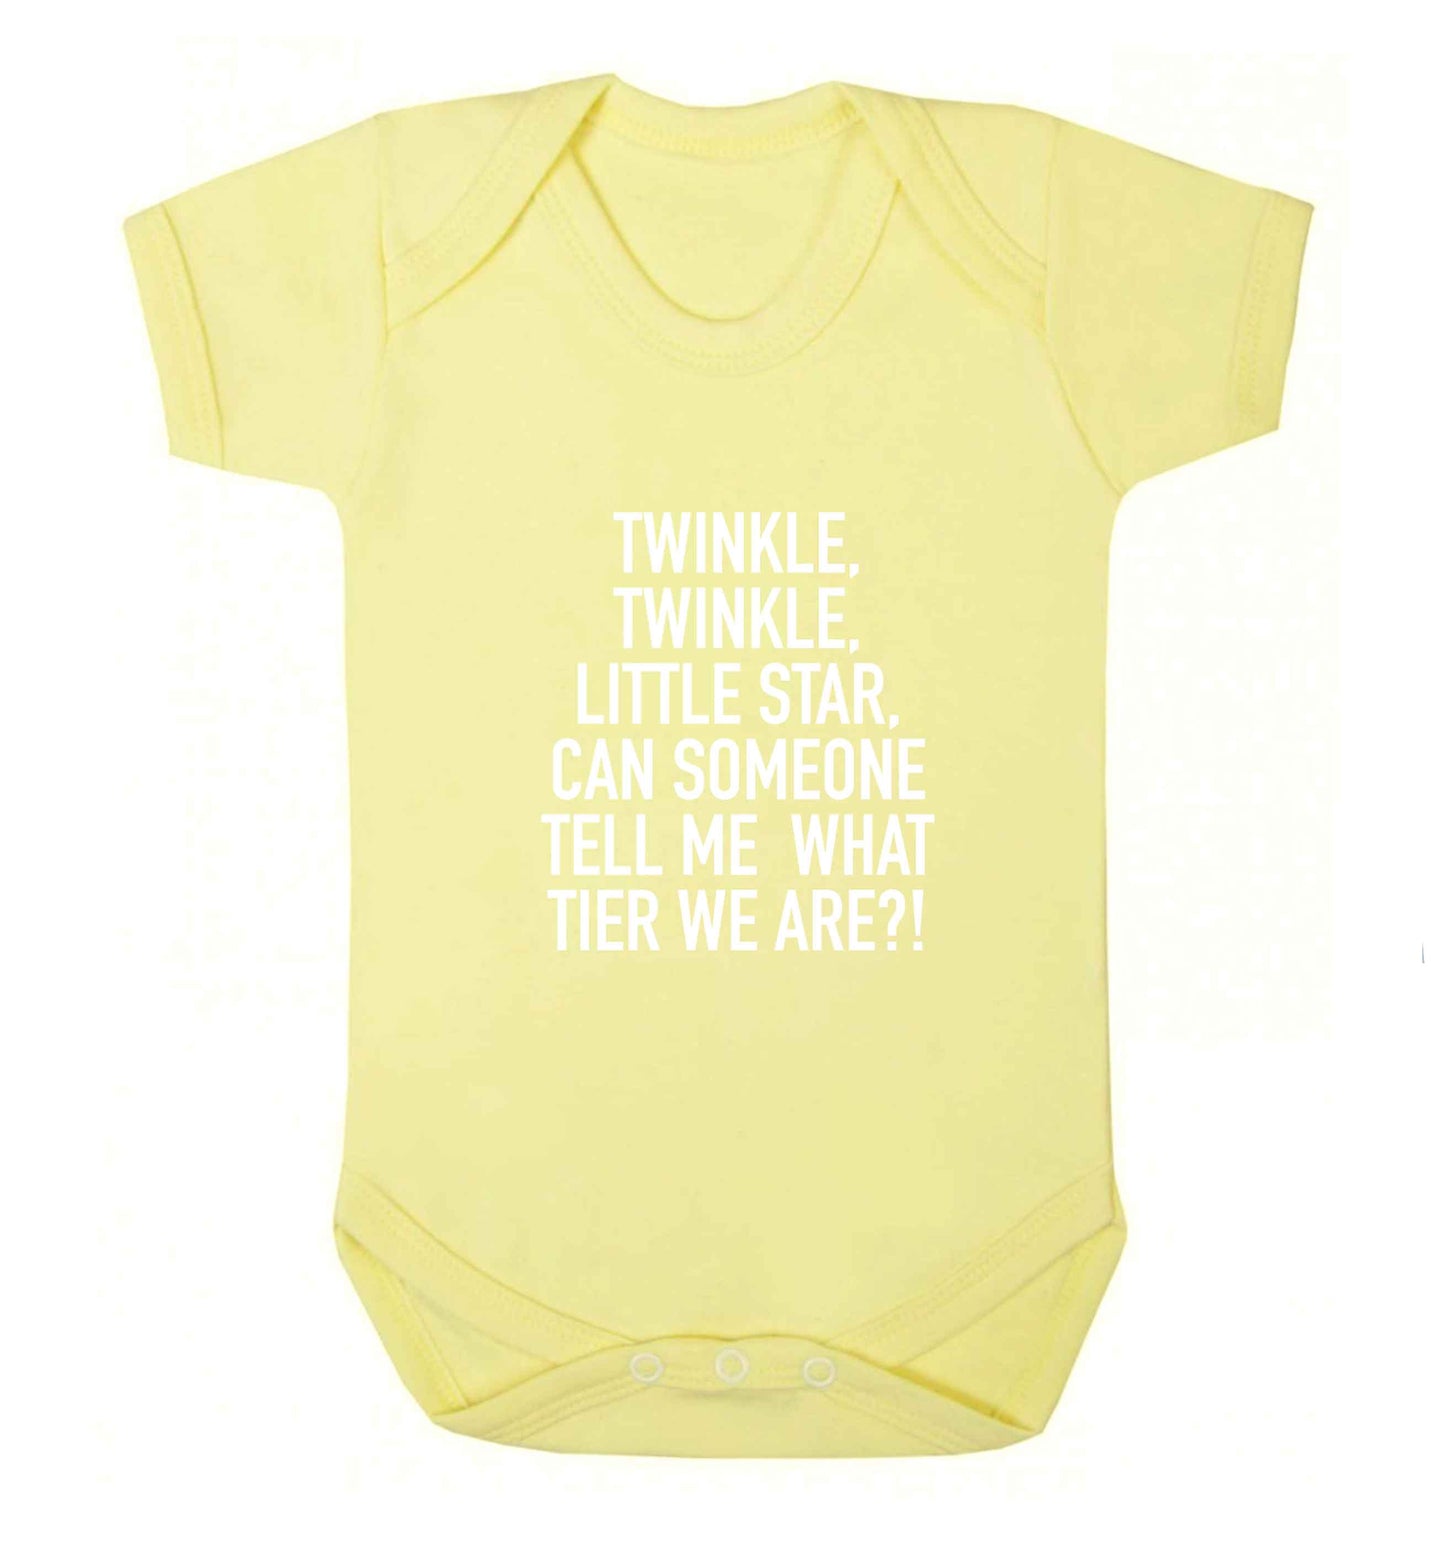 Twinkle twinkle, little star does anyone know what tier we are? baby vest pale yellow 18-24 months